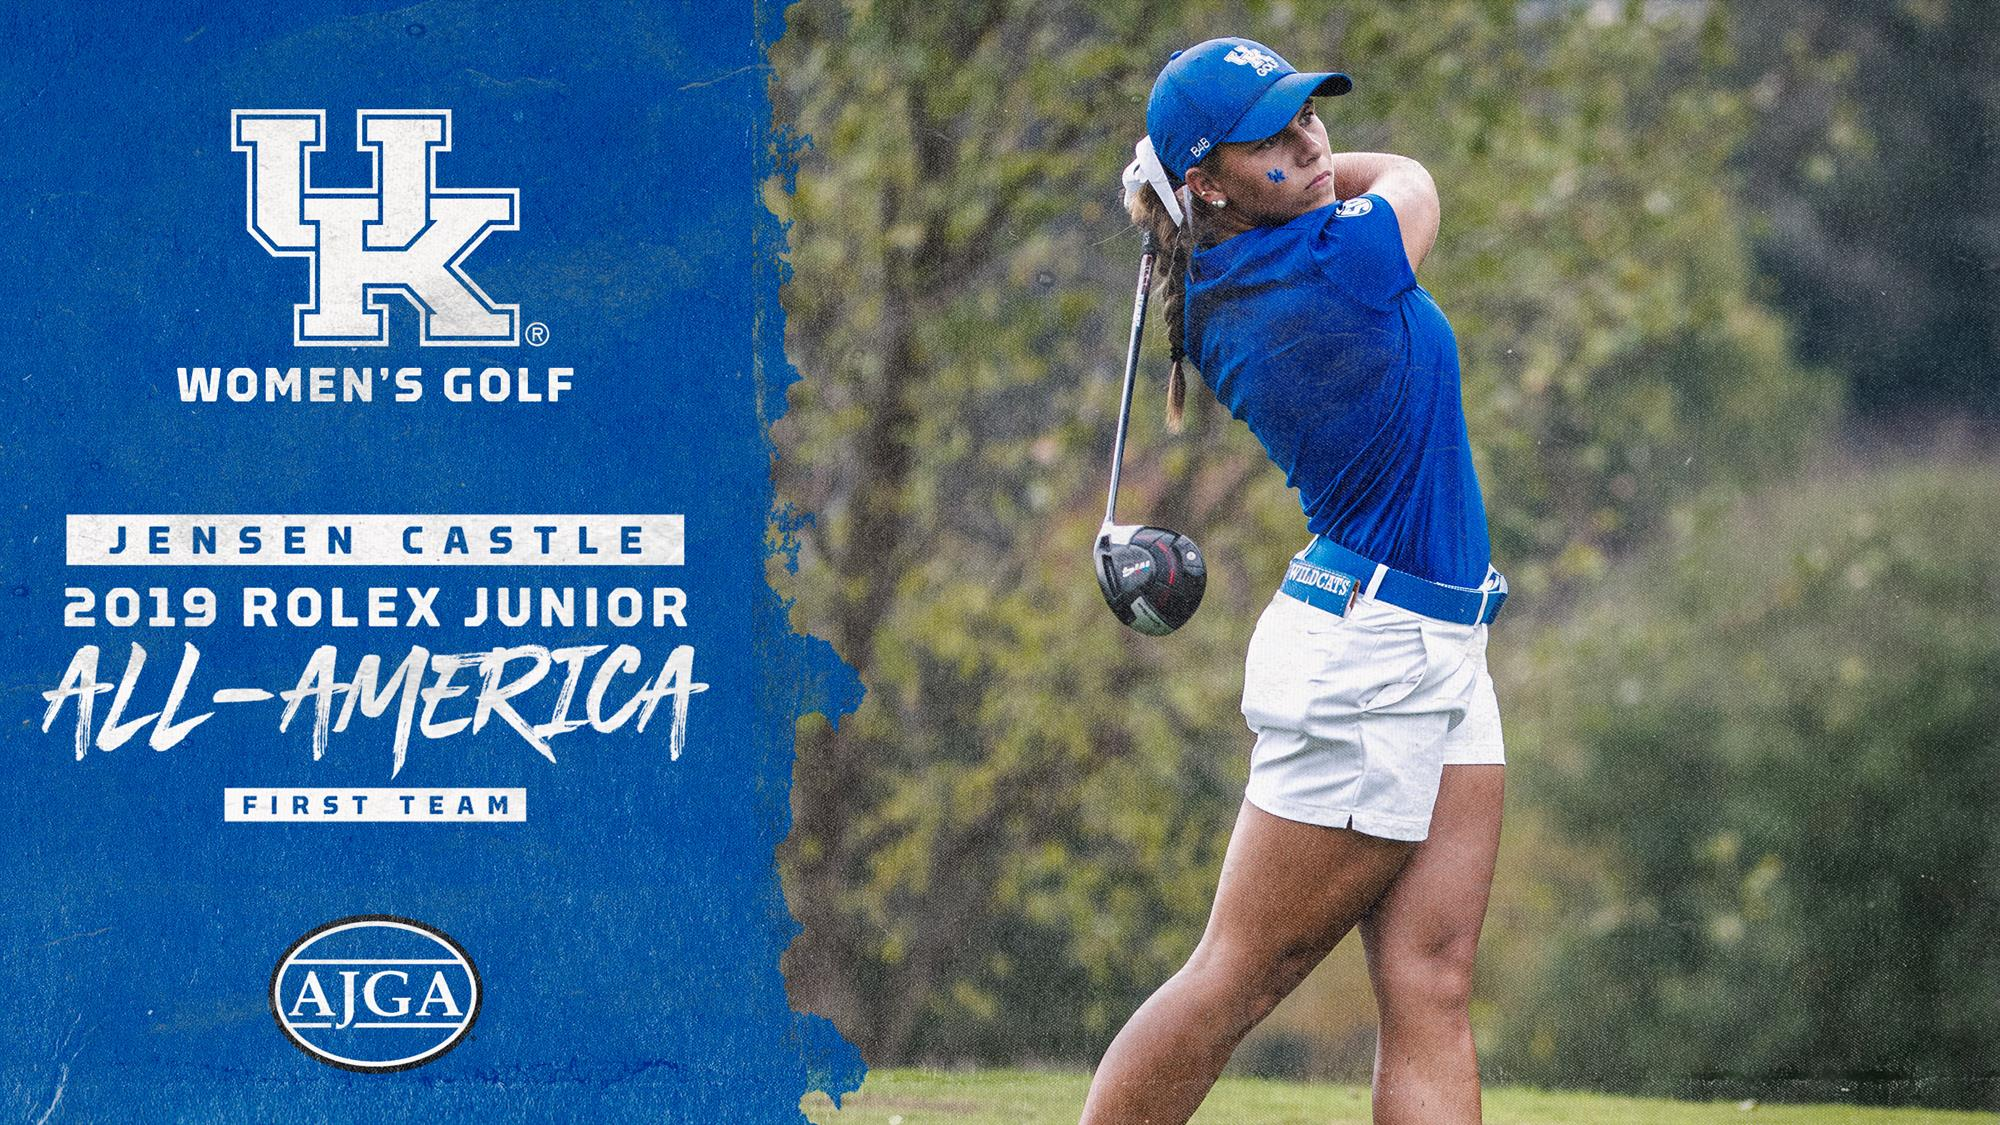 Castle Named 2019 Rolex Junior All-American by AJGA